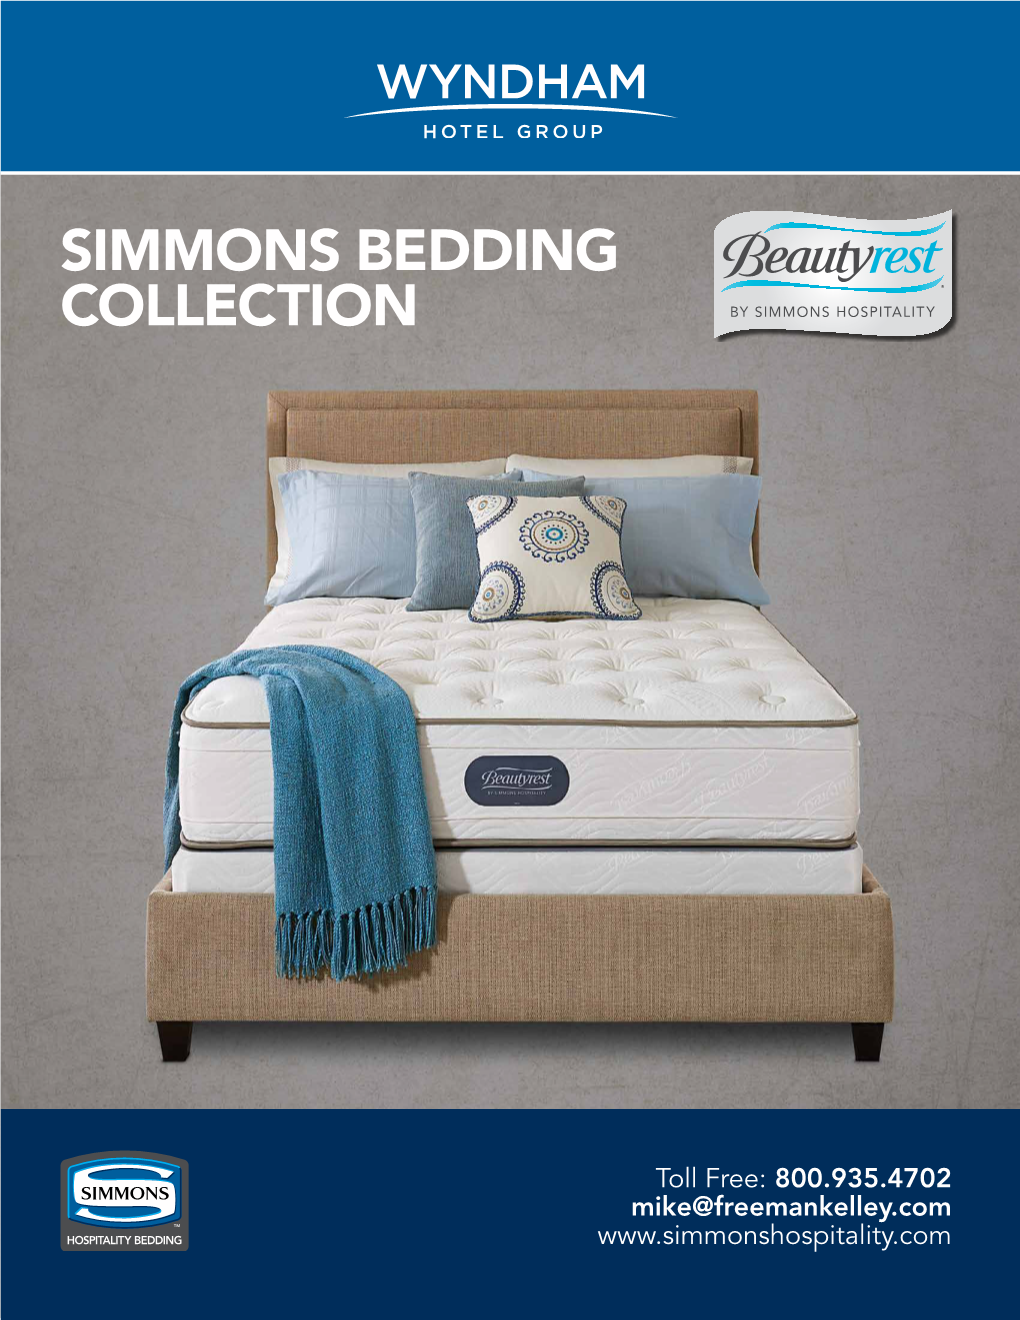 Simmons Bedding Collection